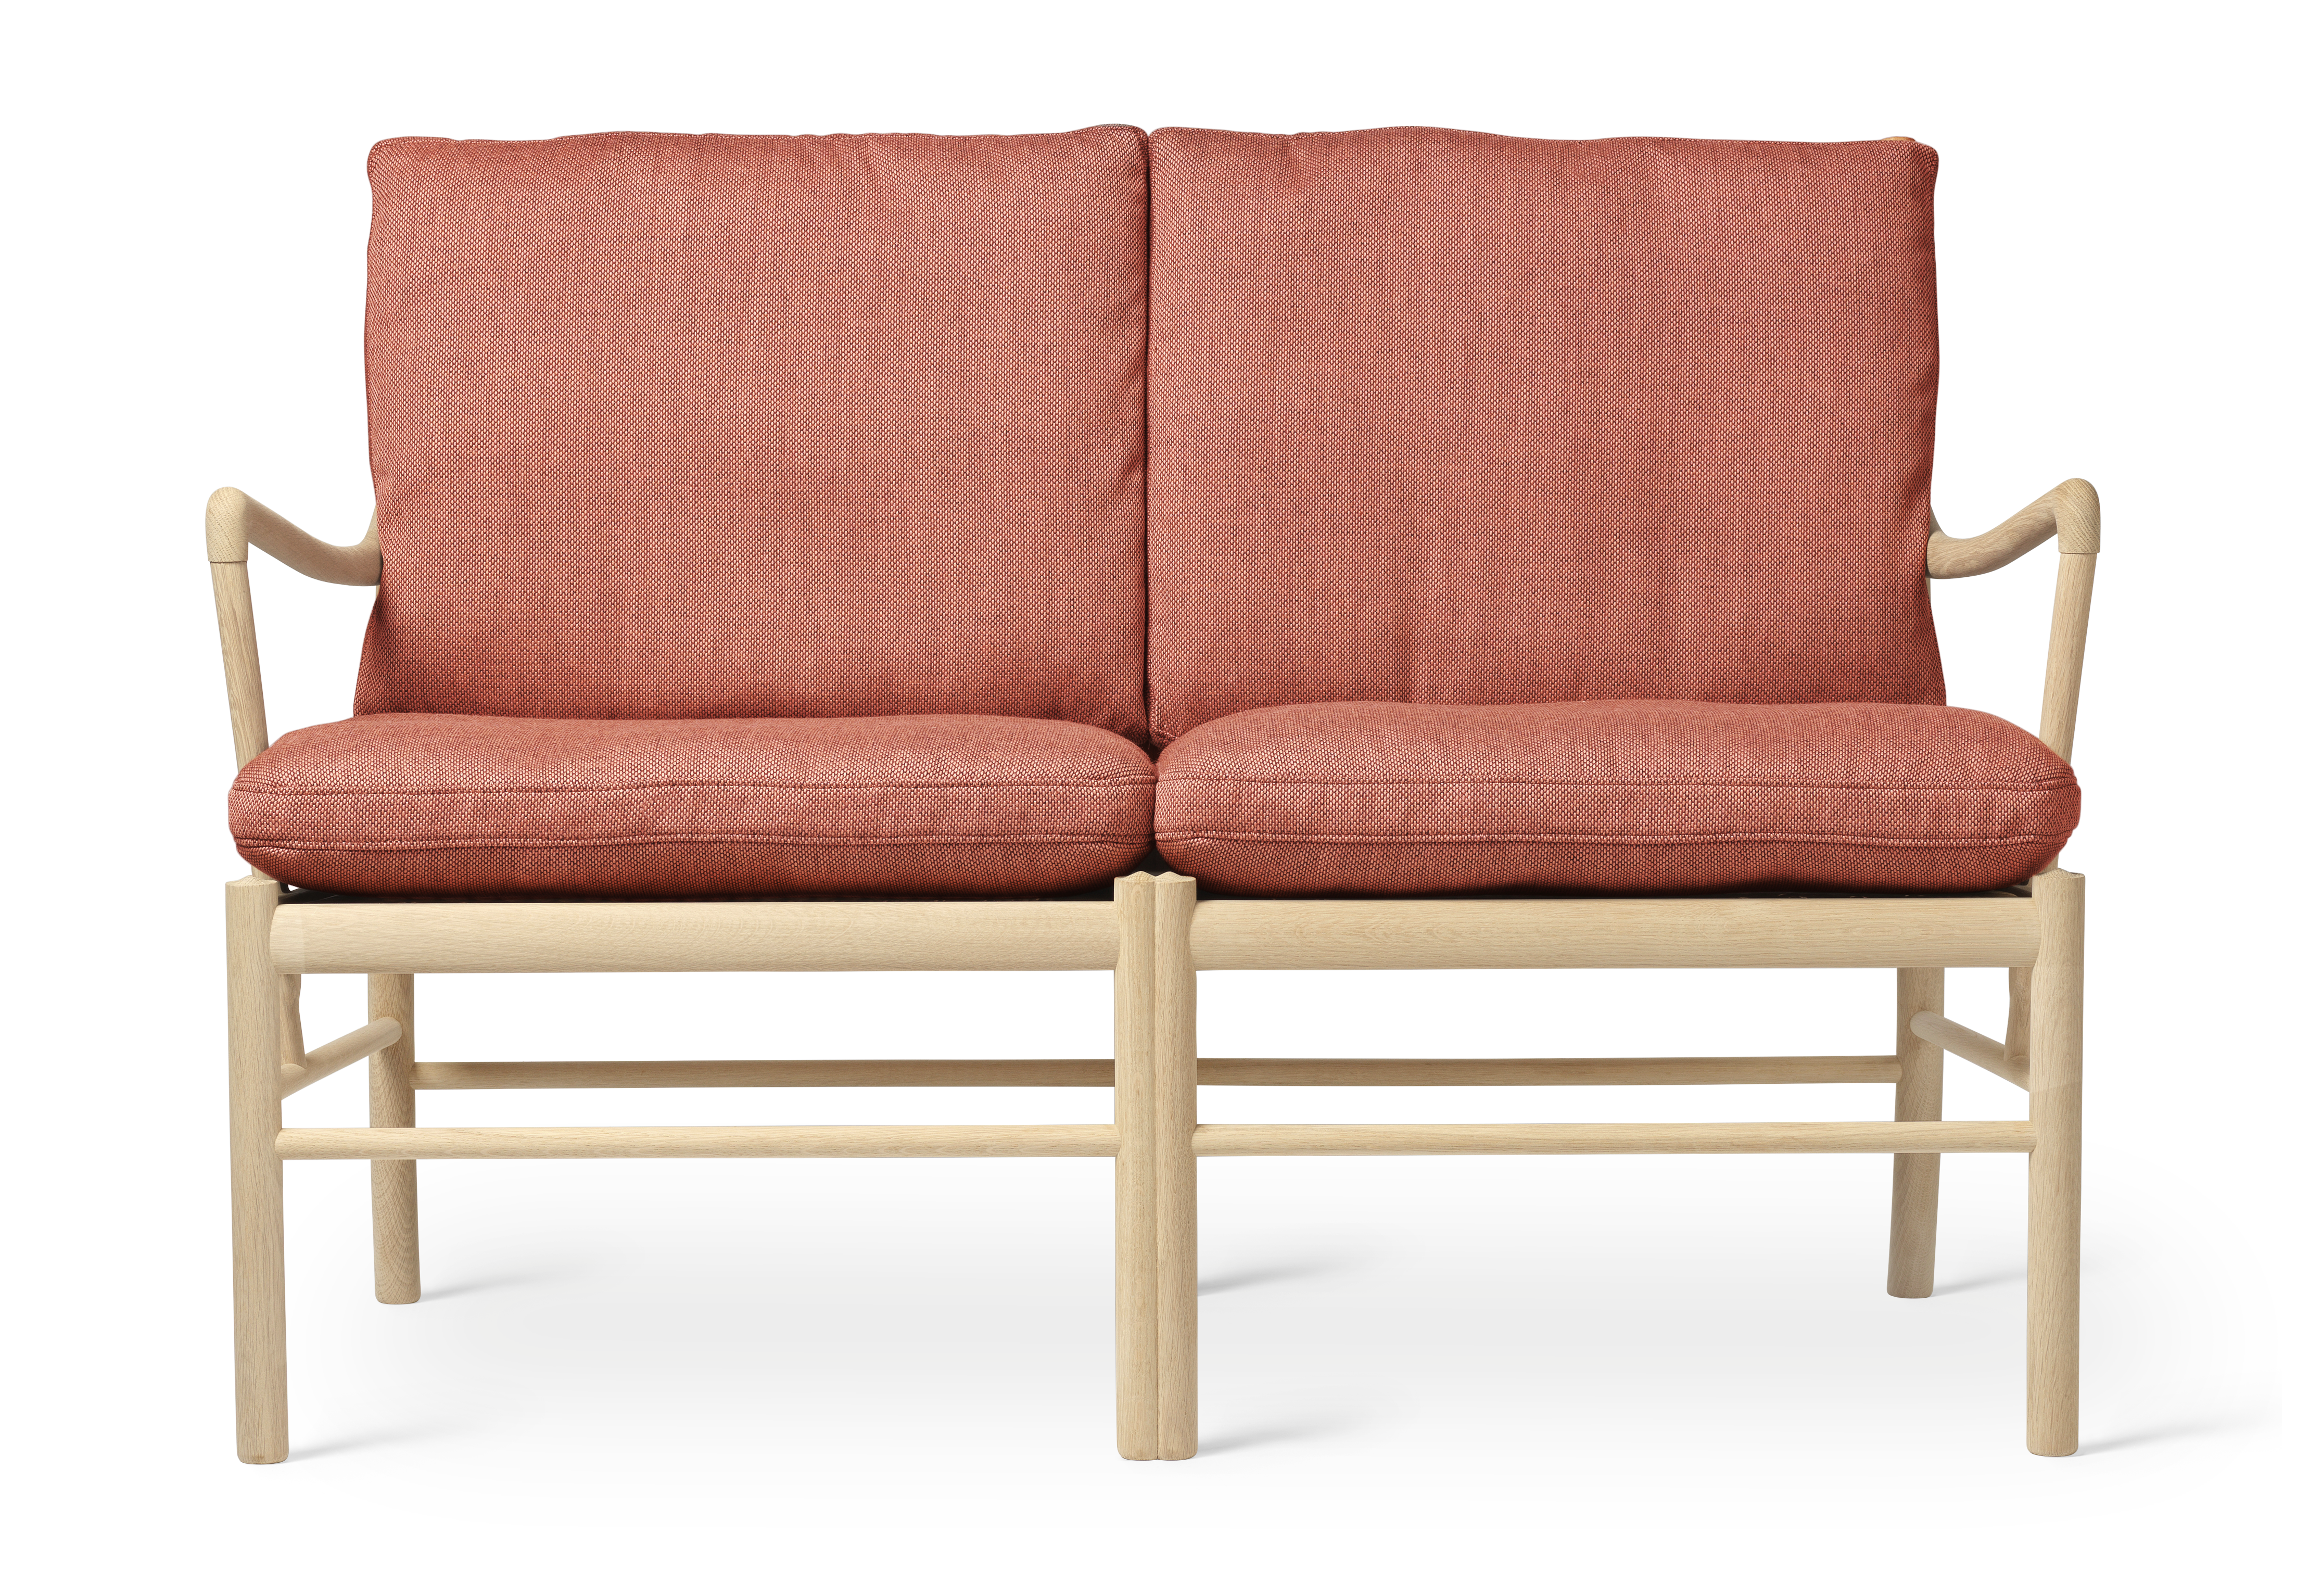 Want Surrender material OW149-2 Colonial Sofa | by Ole Wanscher | Carl Hansen & Søn